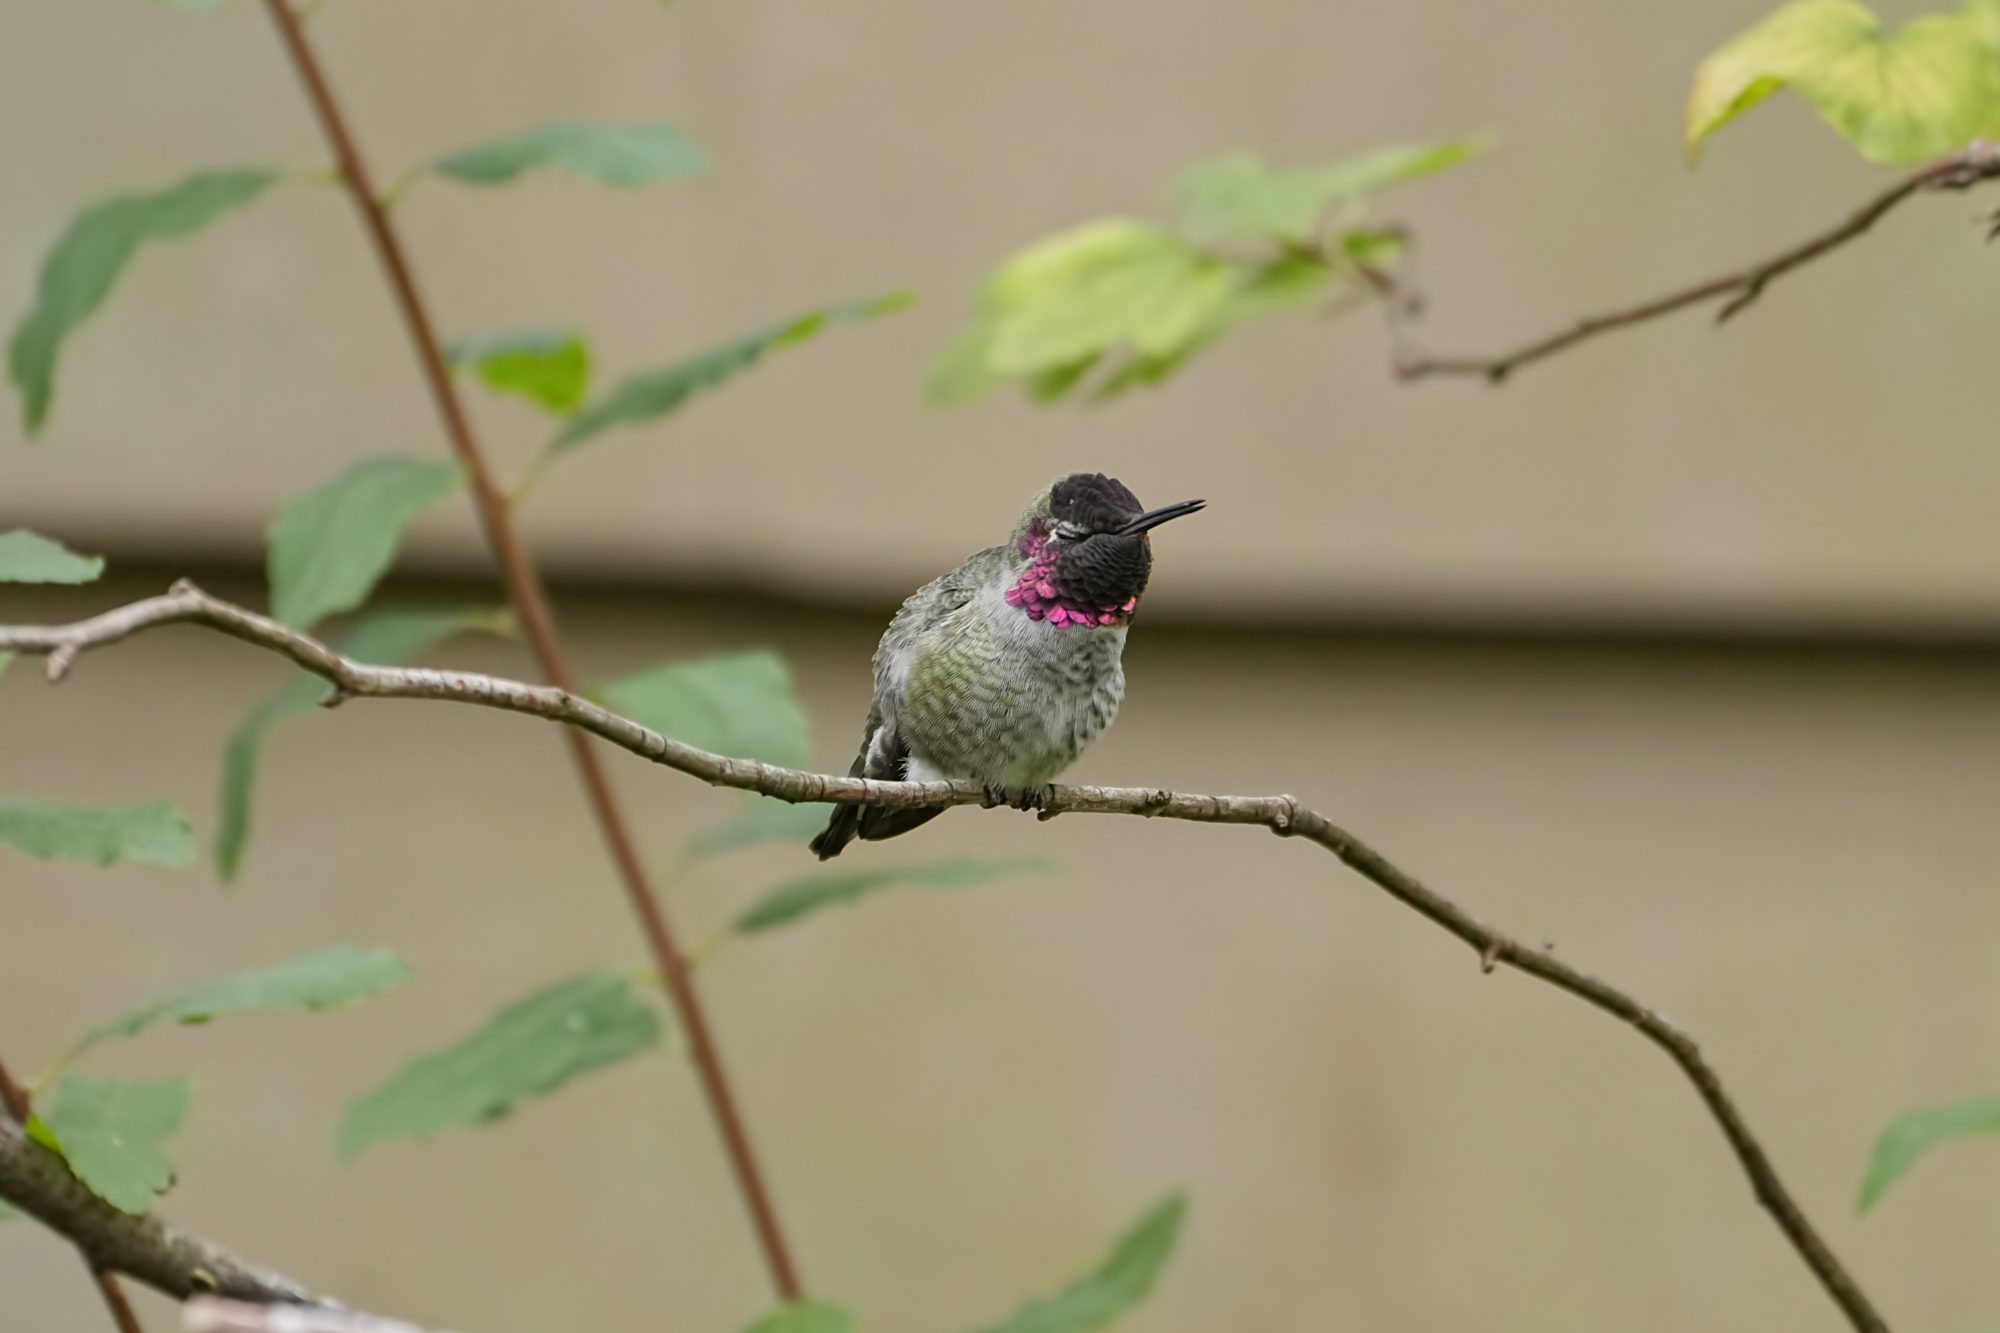 A male Anna's Hummingbird on a branch, singing. Its gorget is a little bit pink